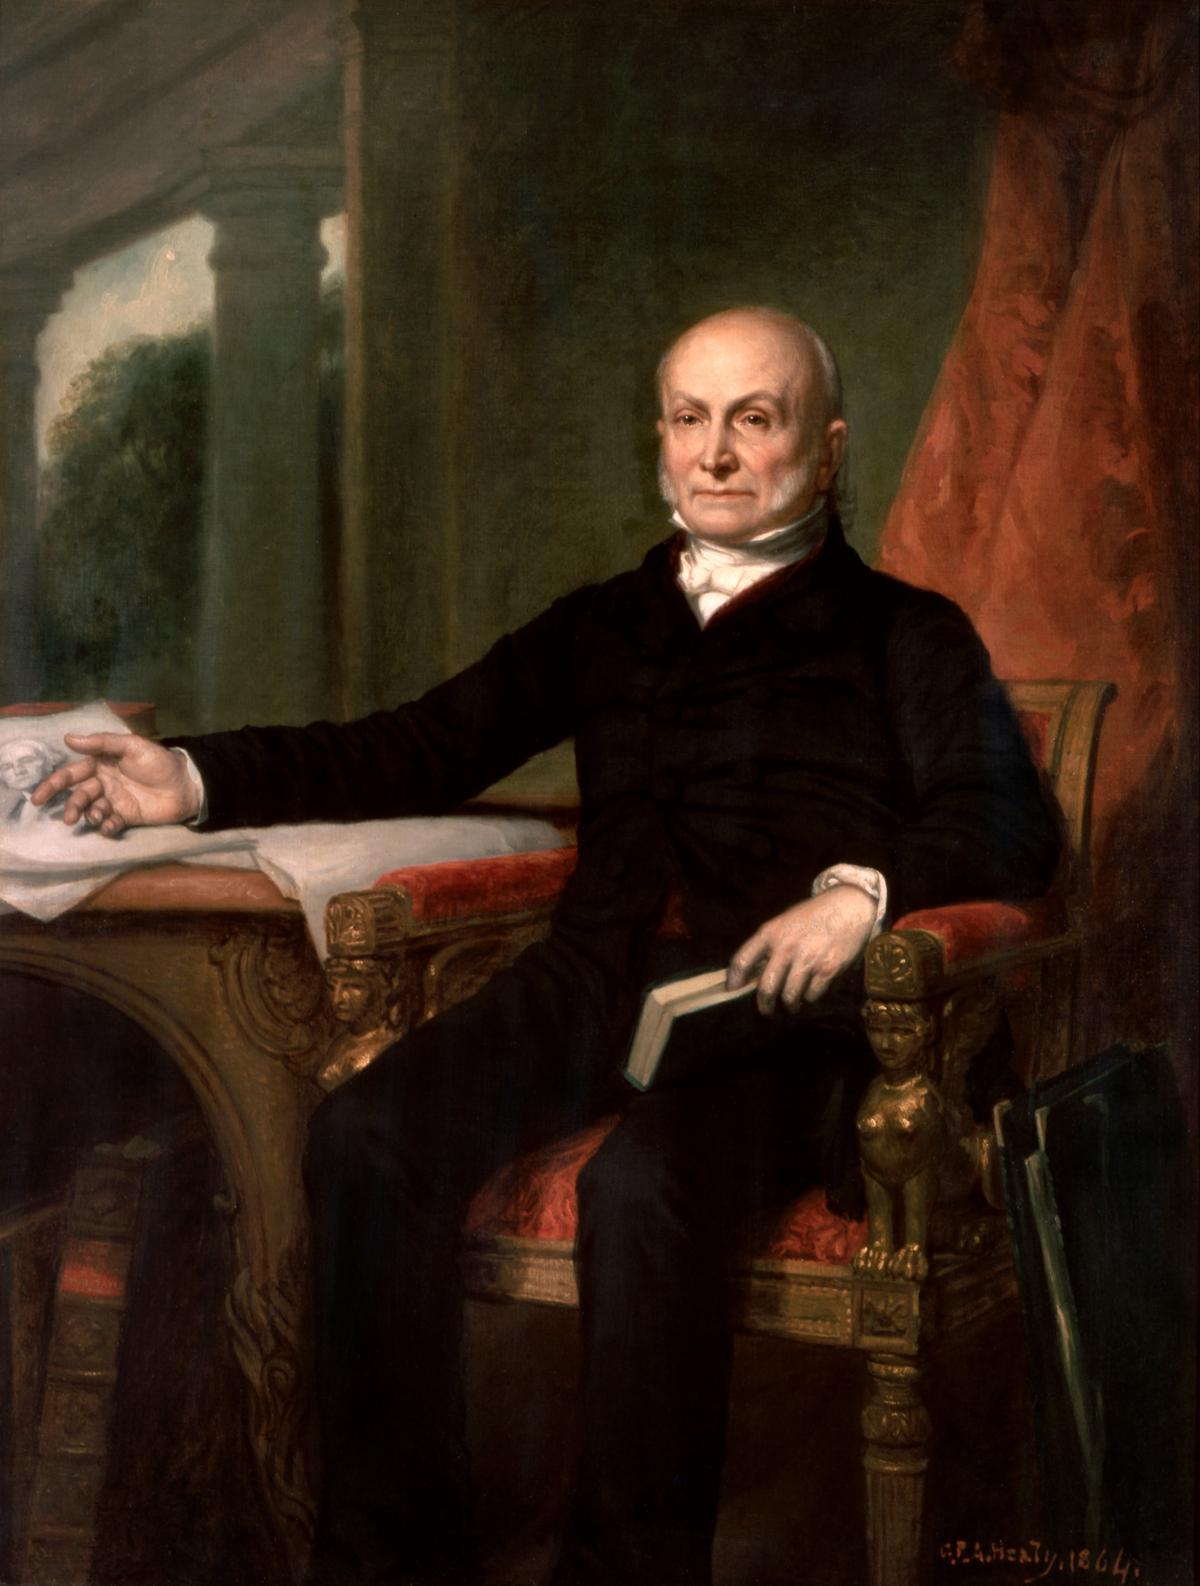 “John Quincy Adams” by George Peter Alexander Healy, 1858. Oil on canvas. White House. (Public Domain)